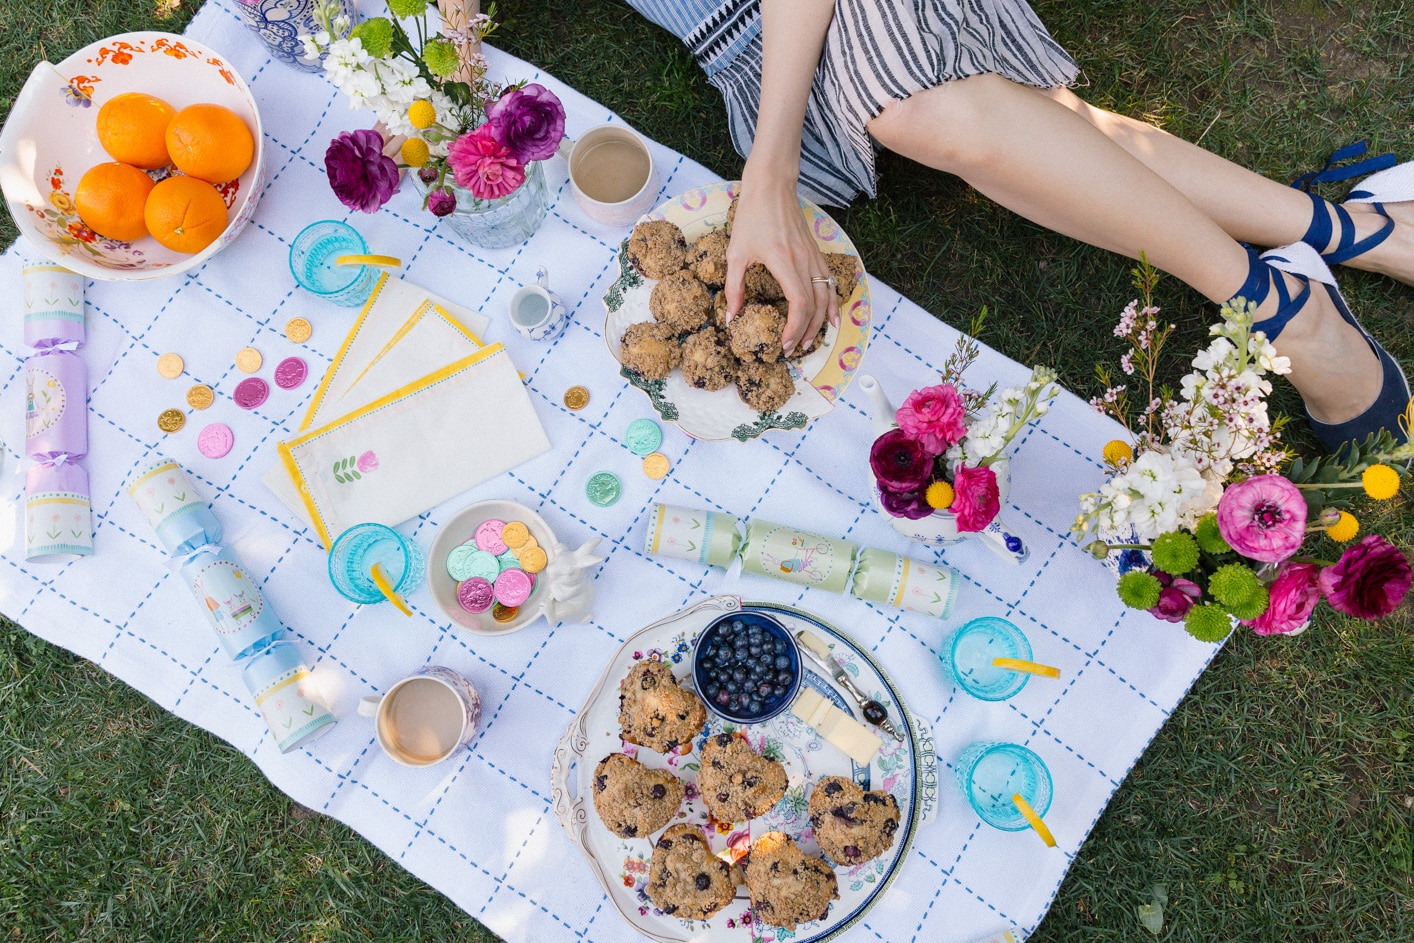 Louise Roe Easter Tea Party With Early Grey Blueberry Muffins And Spring Floral Arrangements